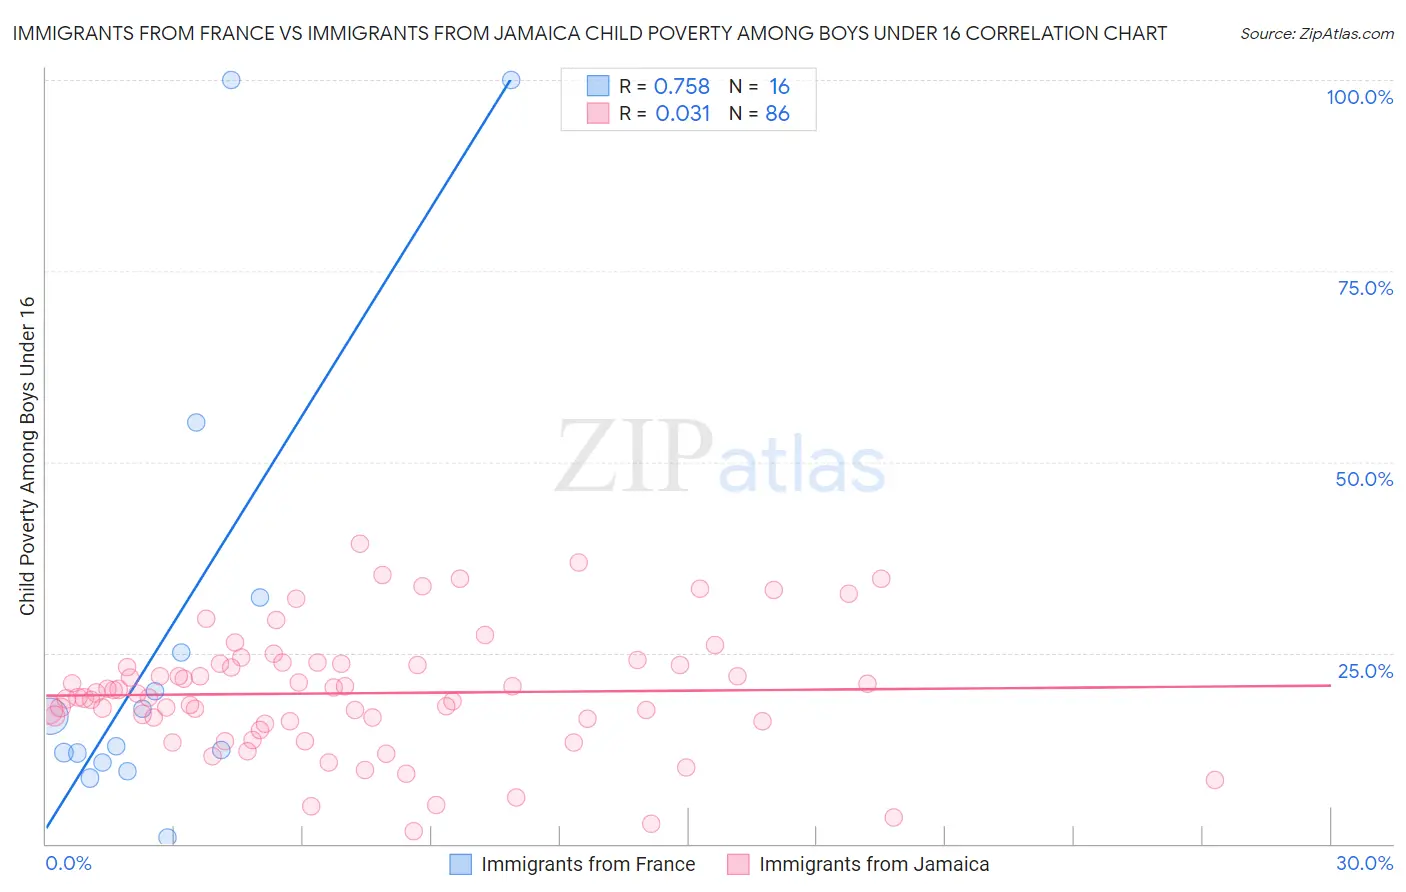 Immigrants from France vs Immigrants from Jamaica Child Poverty Among Boys Under 16